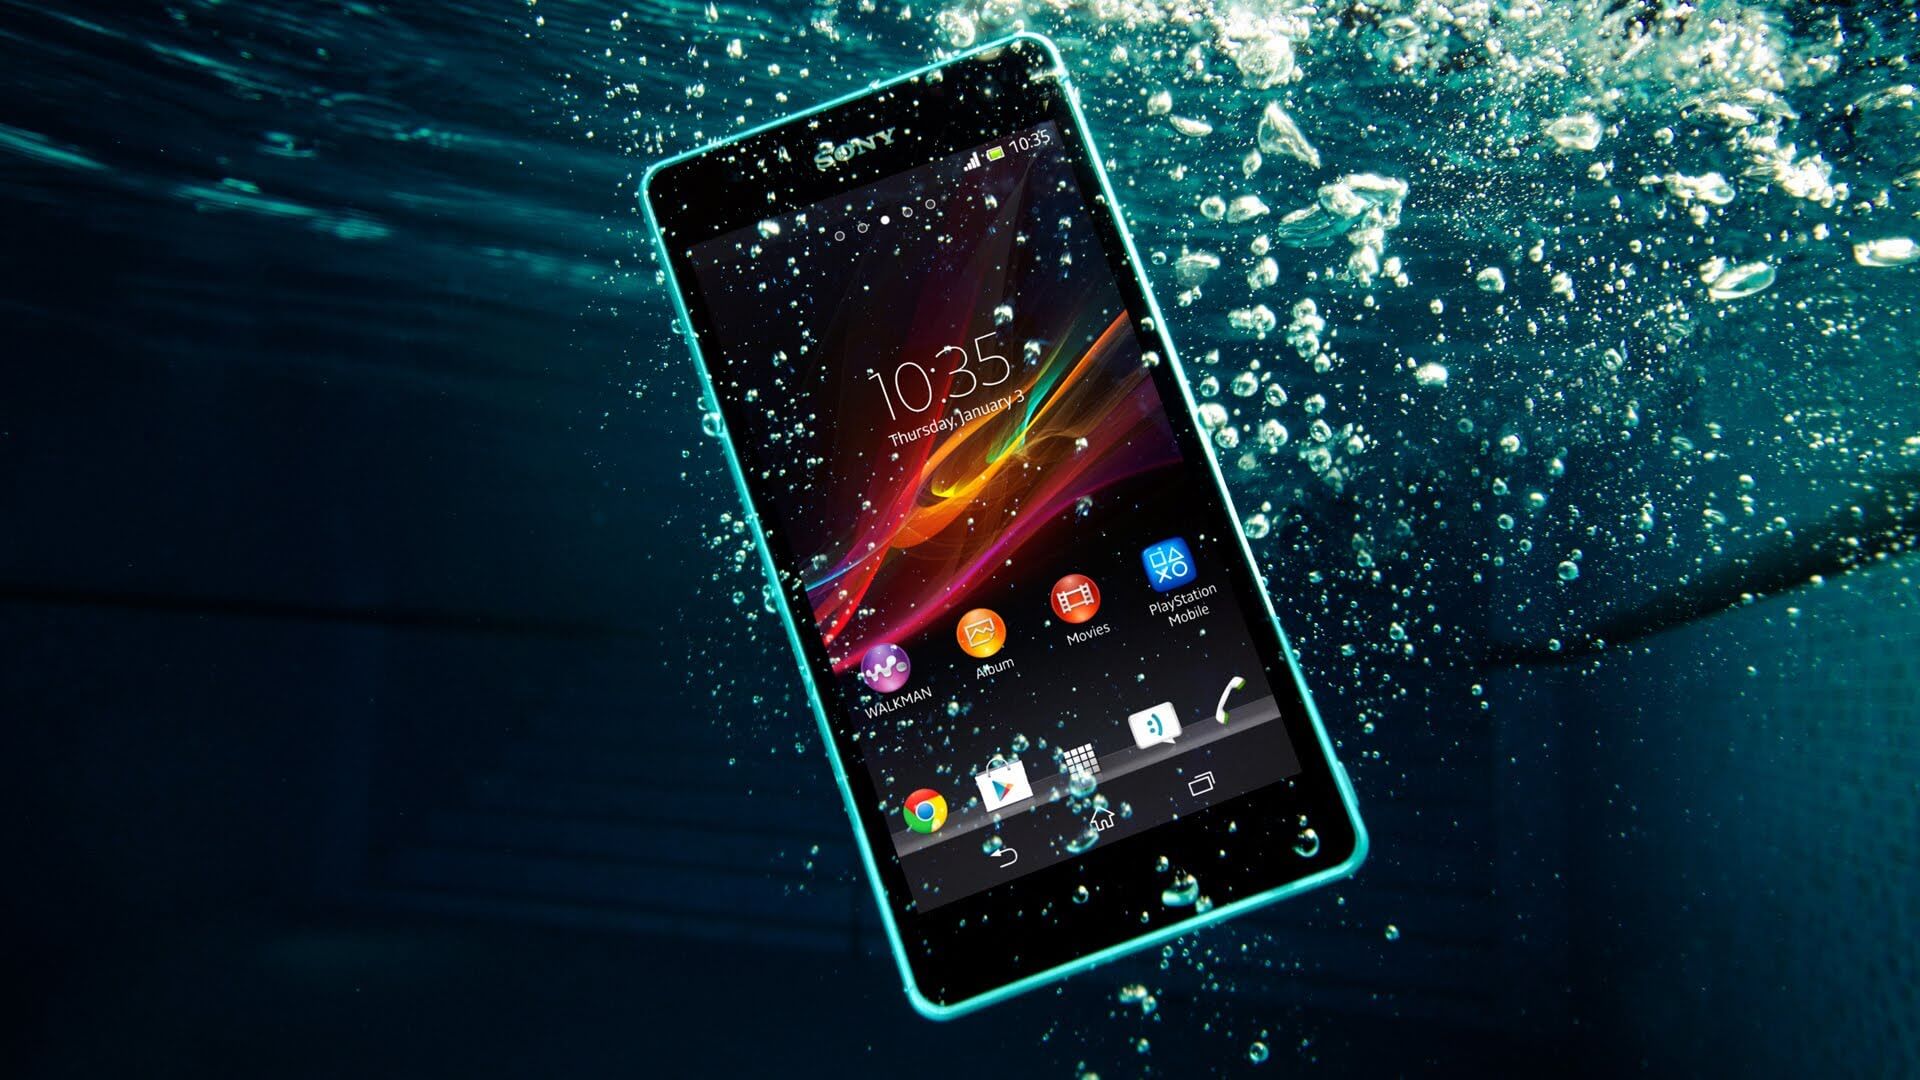  A photo of an iQOO 13 smartphone submerged in water, demonstrating its water-resistant capabilities.